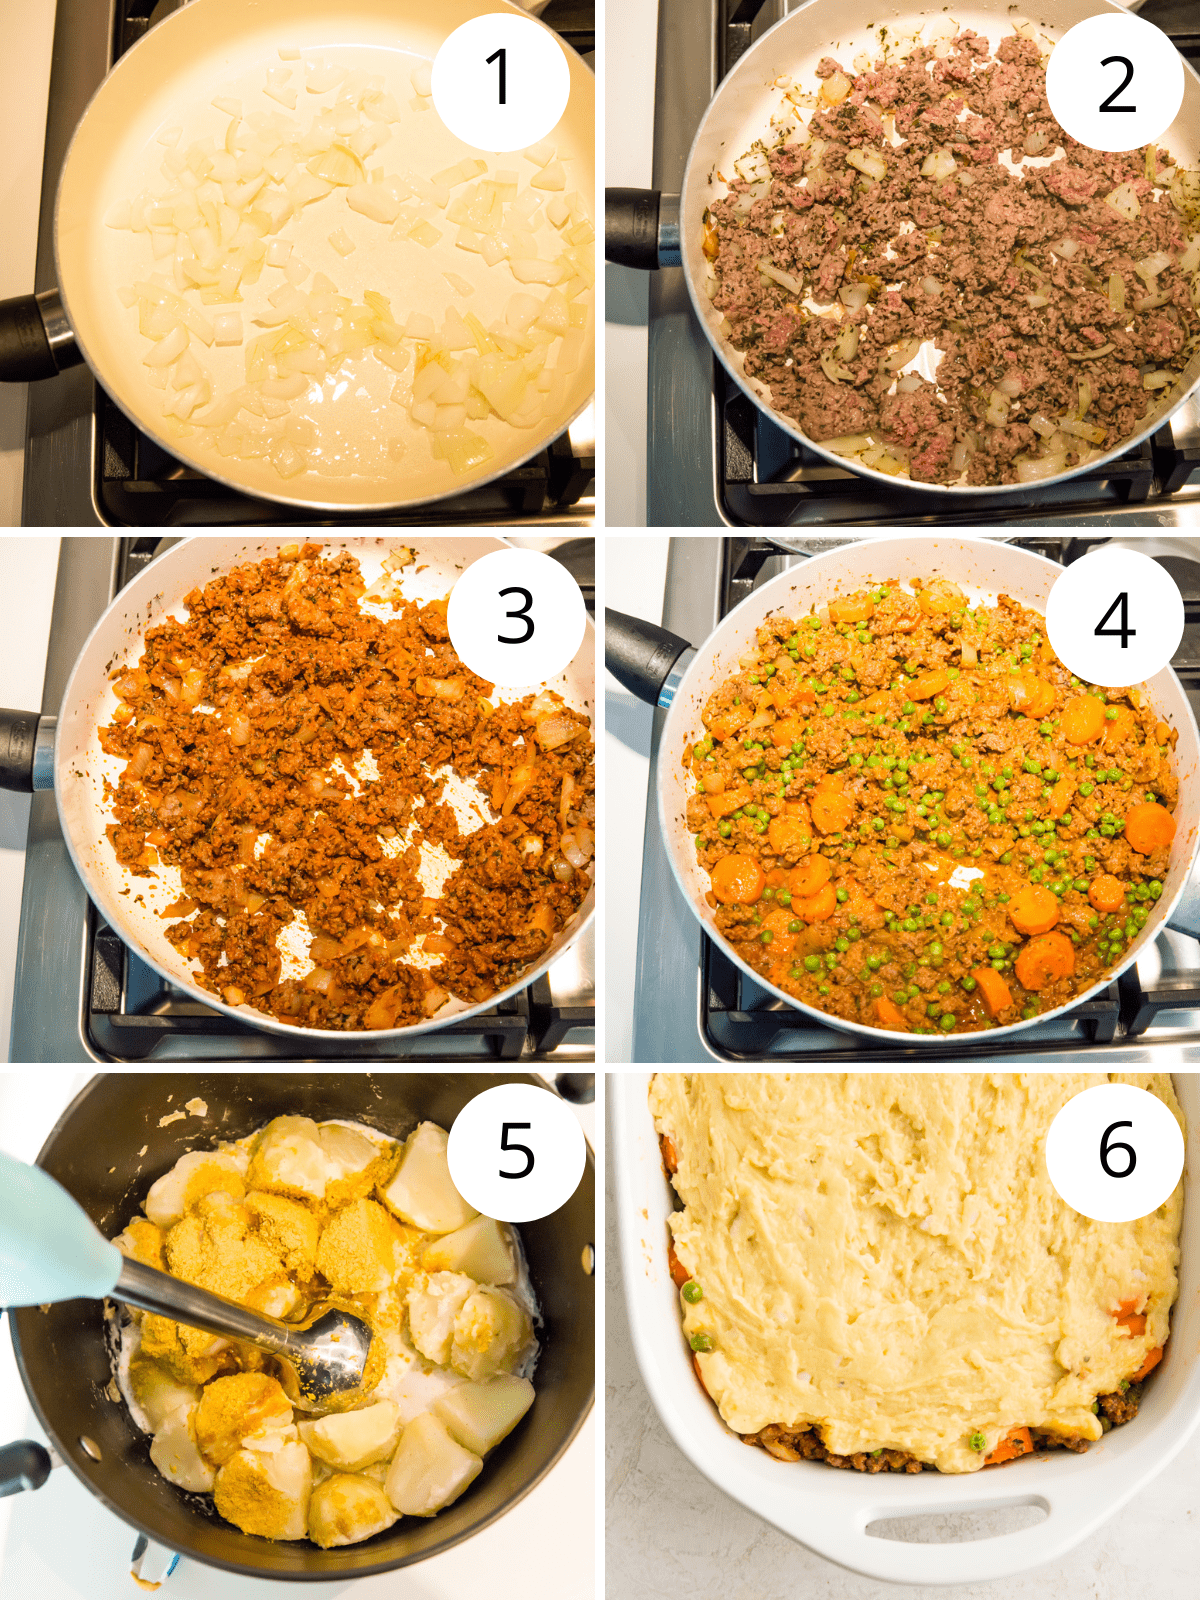 Step by step directions for making a Whole30 shepherd's pie. 